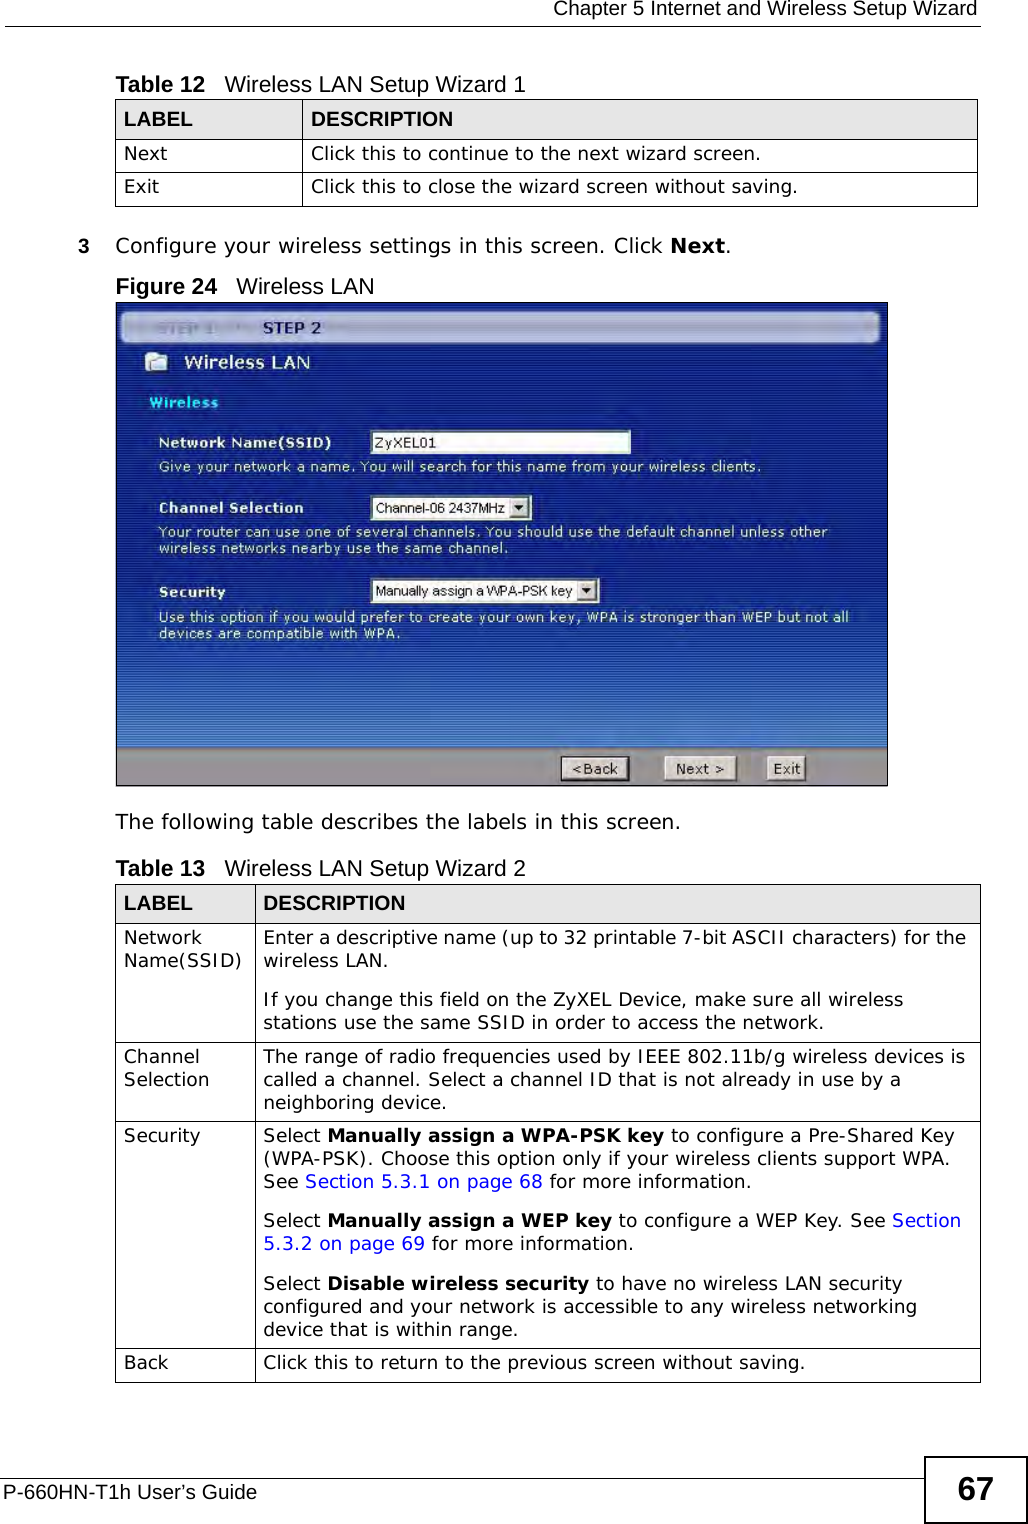  Chapter 5 Internet and Wireless Setup WizardP-660HN-T1h User’s Guide 673Configure your wireless settings in this screen. Click Next.Figure 24   Wireless LAN The following table describes the labels in this screen.Next Click this to continue to the next wizard screen.Exit Click this to close the wizard screen without saving.Table 12   Wireless LAN Setup Wizard 1LABEL DESCRIPTIONTable 13   Wireless LAN Setup Wizard 2LABEL DESCRIPTIONNetwork Name(SSID) Enter a descriptive name (up to 32 printable 7-bit ASCII characters) for the wireless LAN. If you change this field on the ZyXEL Device, make sure all wireless stations use the same SSID in order to access the network. Channel Selection The range of radio frequencies used by IEEE 802.11b/g wireless devices is called a channel. Select a channel ID that is not already in use by a neighboring device.Security Select Manually assign a WPA-PSK key to configure a Pre-Shared Key (WPA-PSK). Choose this option only if your wireless clients support WPA. See Section 5.3.1 on page 68 for more information.Select Manually assign a WEP key to configure a WEP Key. See Section 5.3.2 on page 69 for more information.Select Disable wireless security to have no wireless LAN security configured and your network is accessible to any wireless networking device that is within range.Back Click this to return to the previous screen without saving.